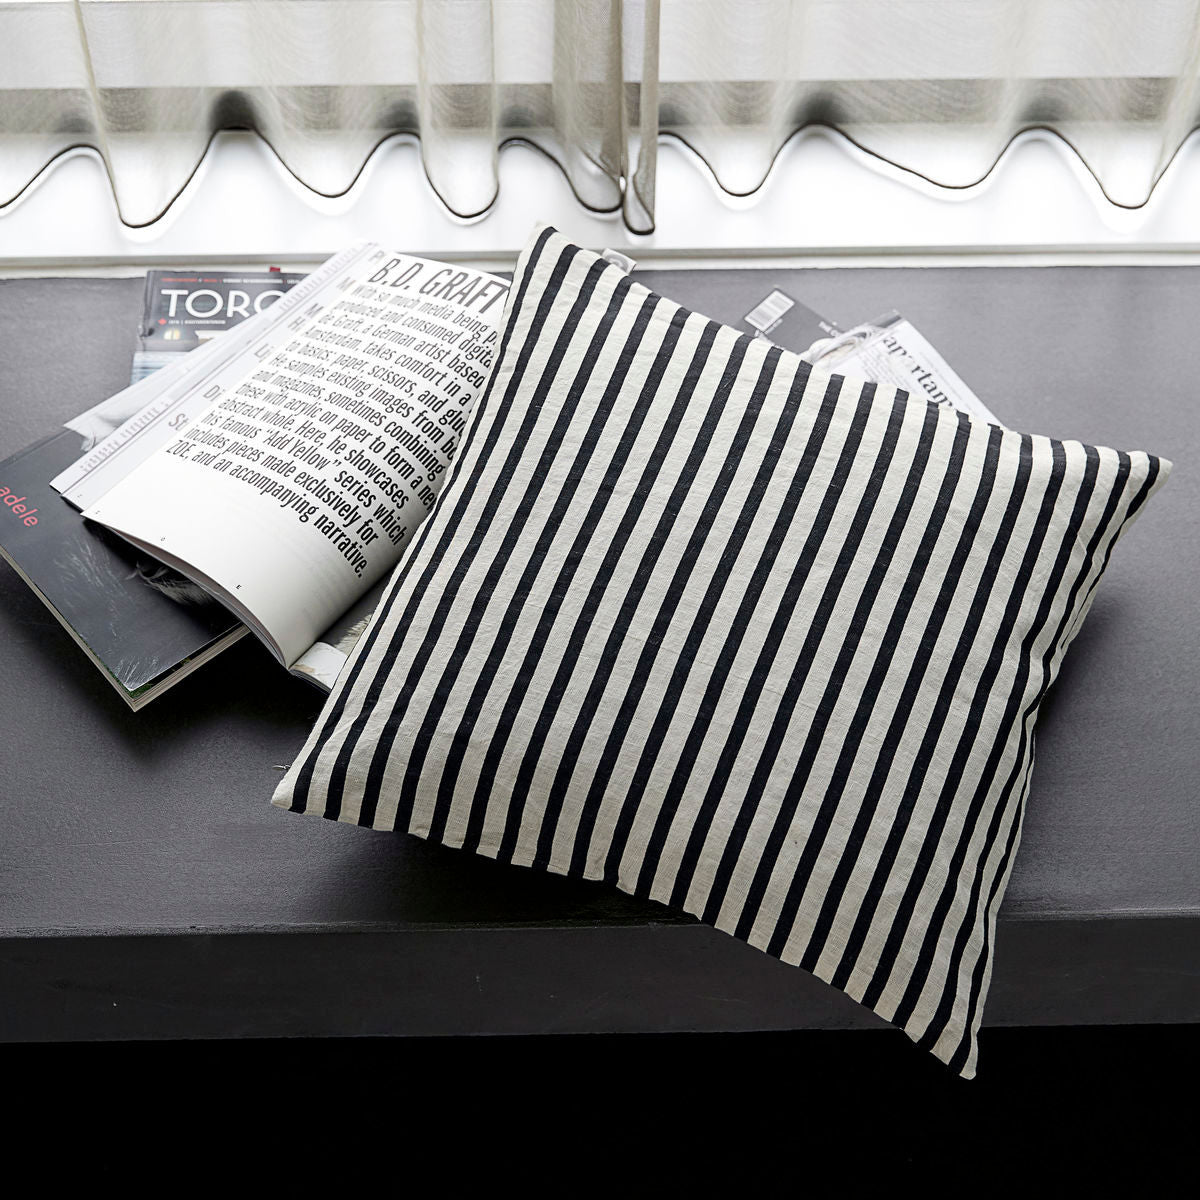 House Doctor Cushion cover, HDHDStripe, Black/Grey